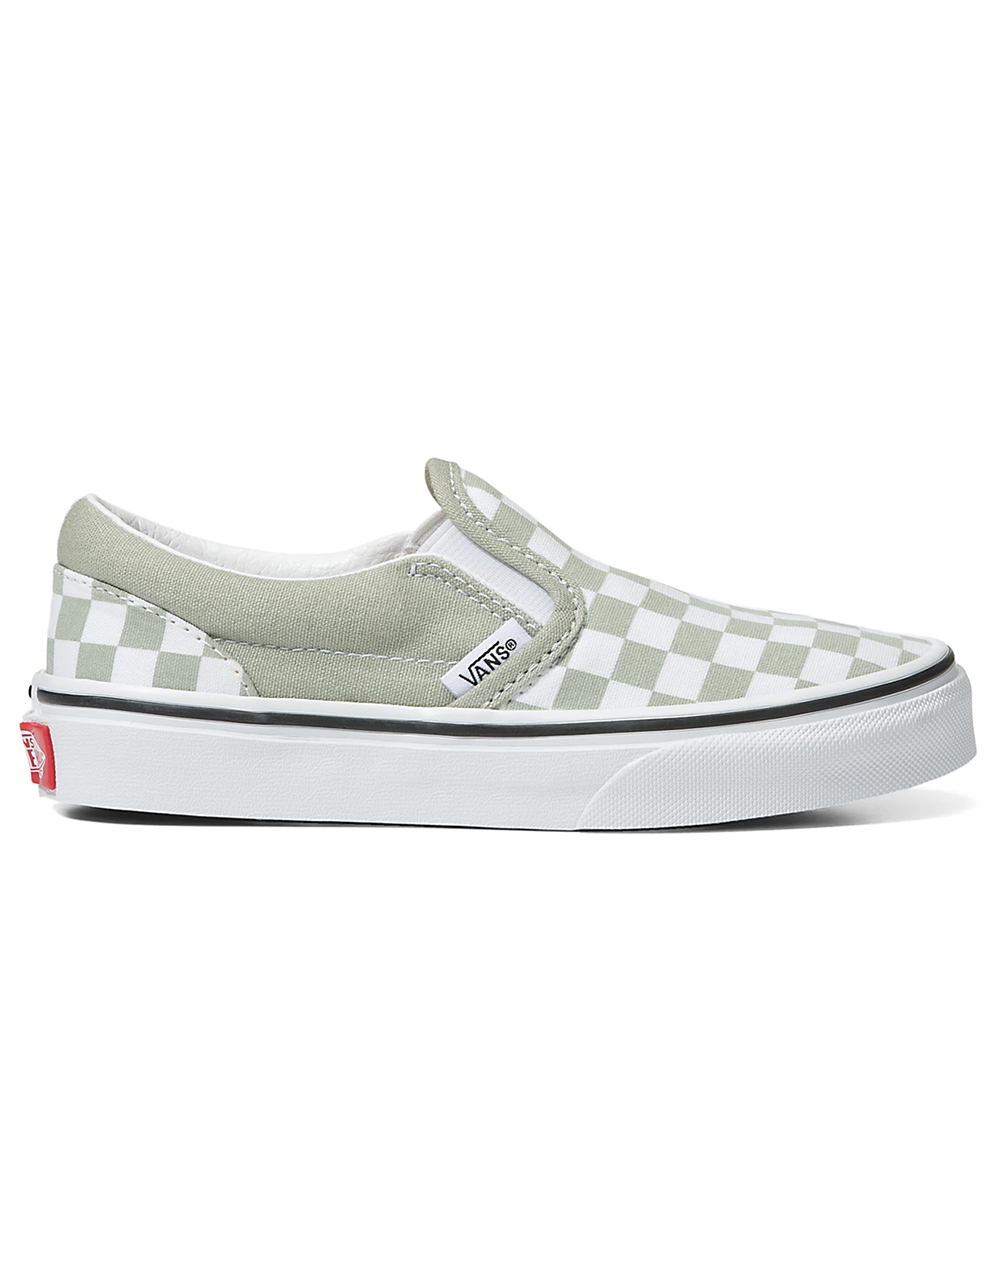 VANS Checkerboard Classic Girls Slip-On Shoes - SAGE | Tillys